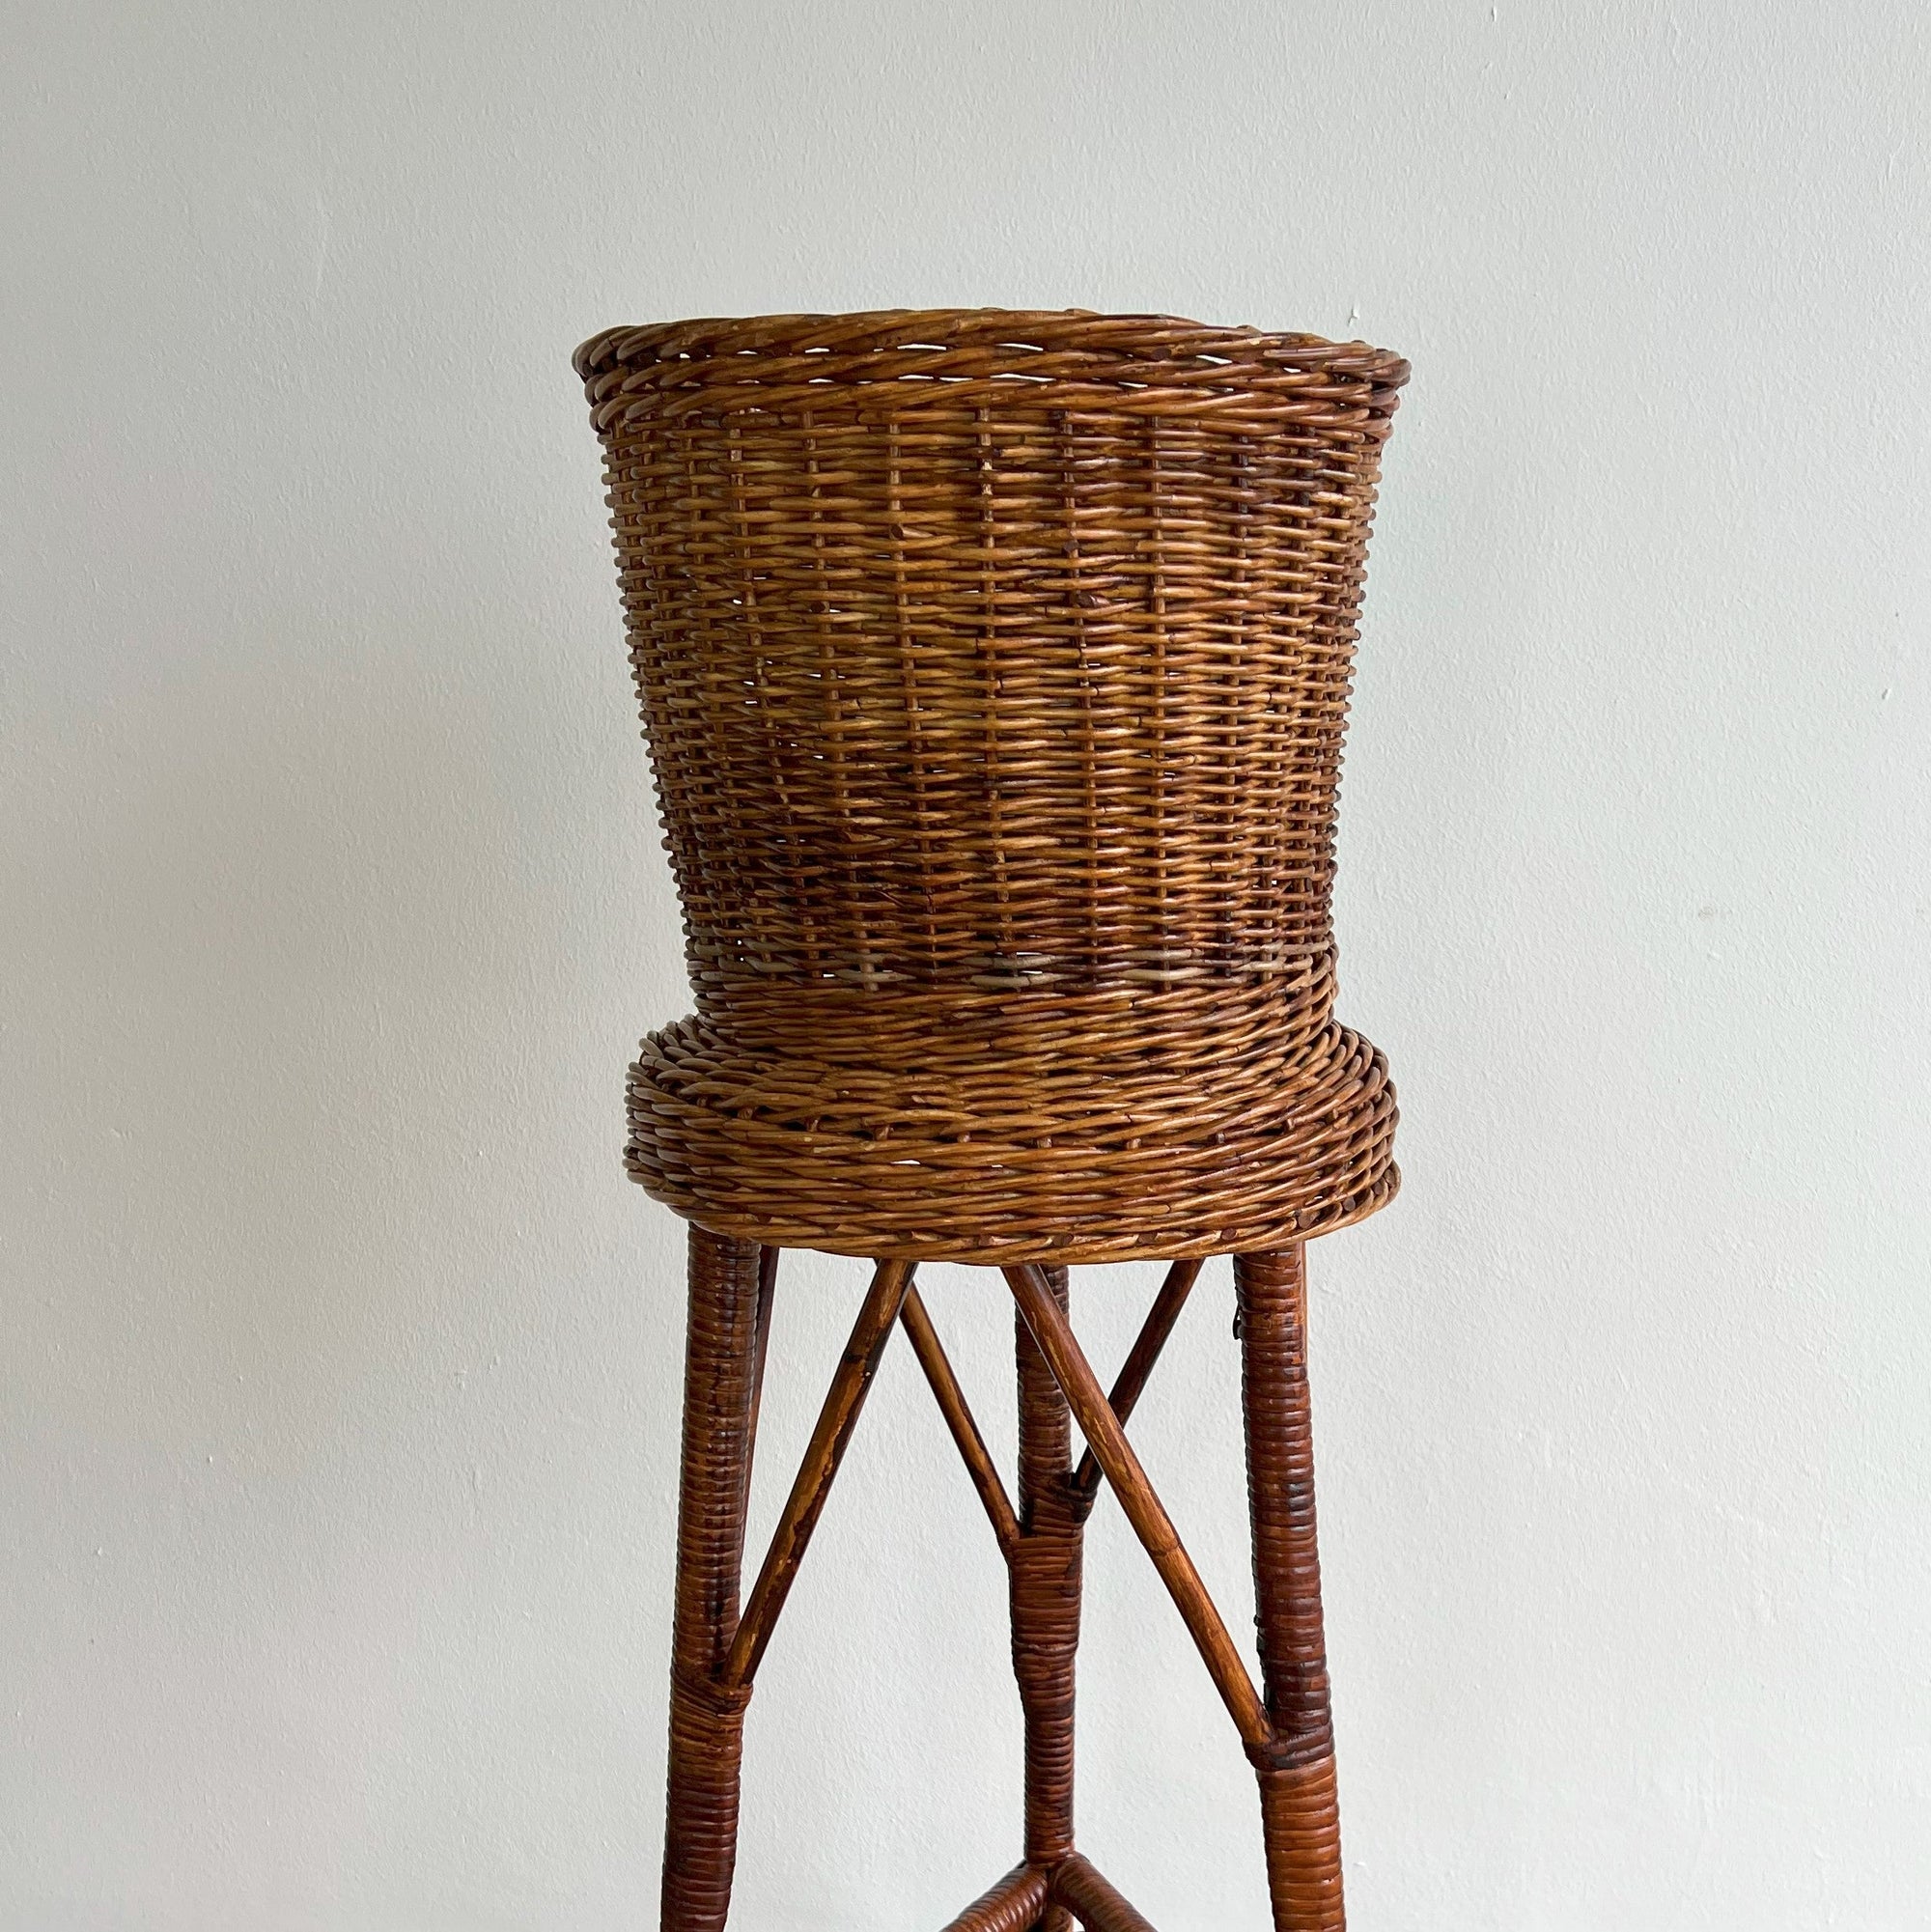 Woven Planter Basket - The Finishing Store South Africa